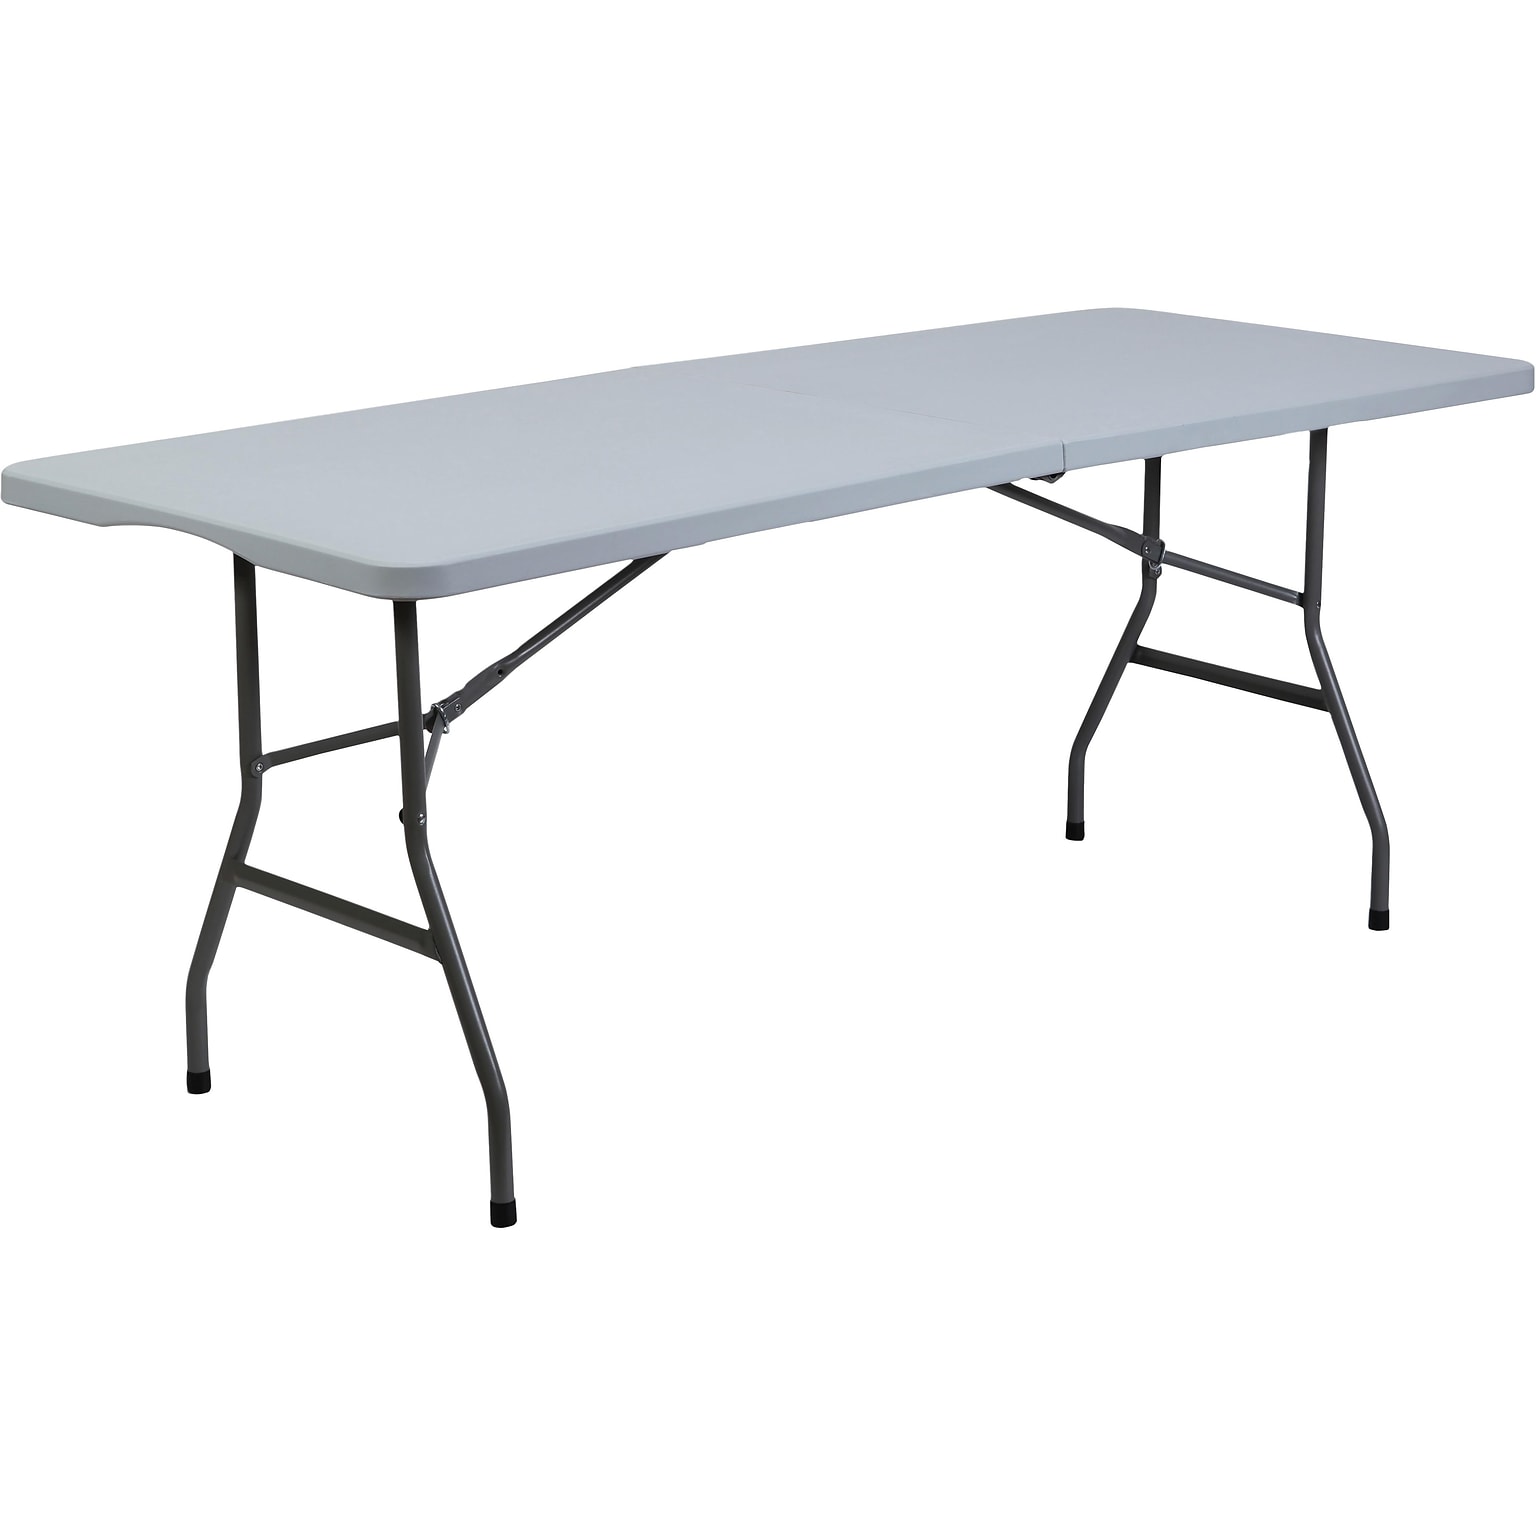 Quill Brand® Folding Table, Light Duty, 72L x 30W, White (79157)